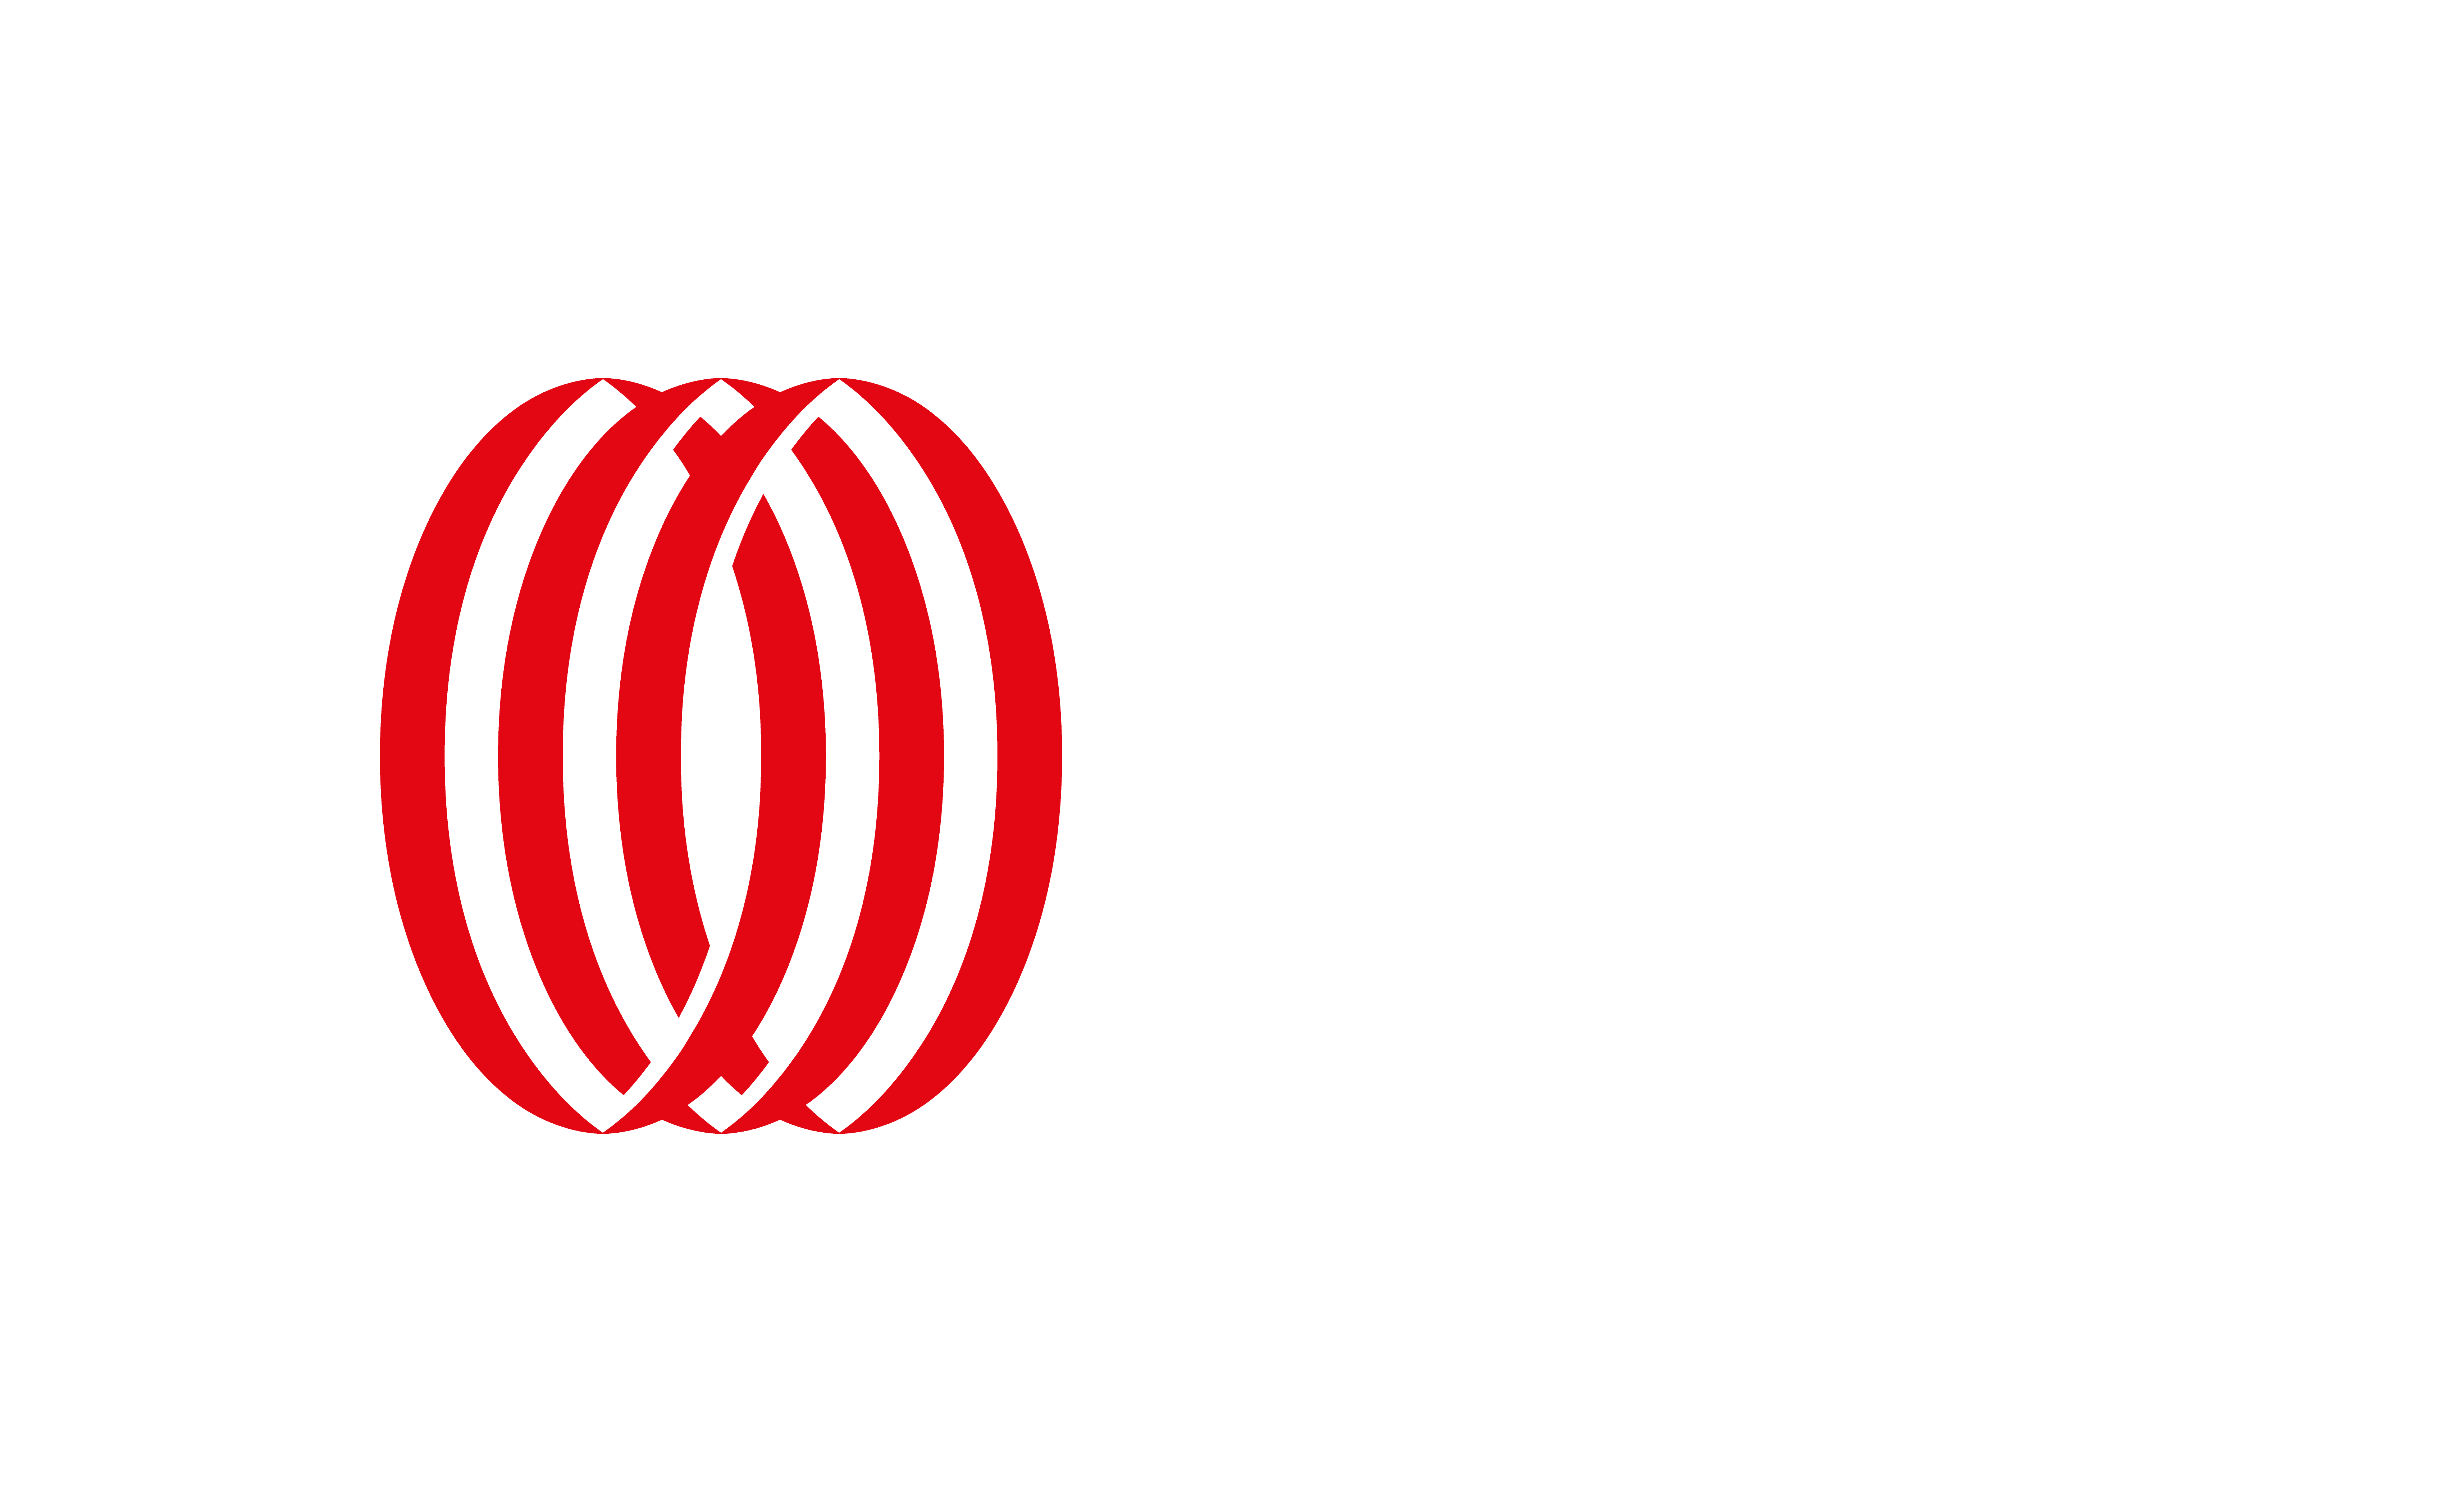 We are JLL.